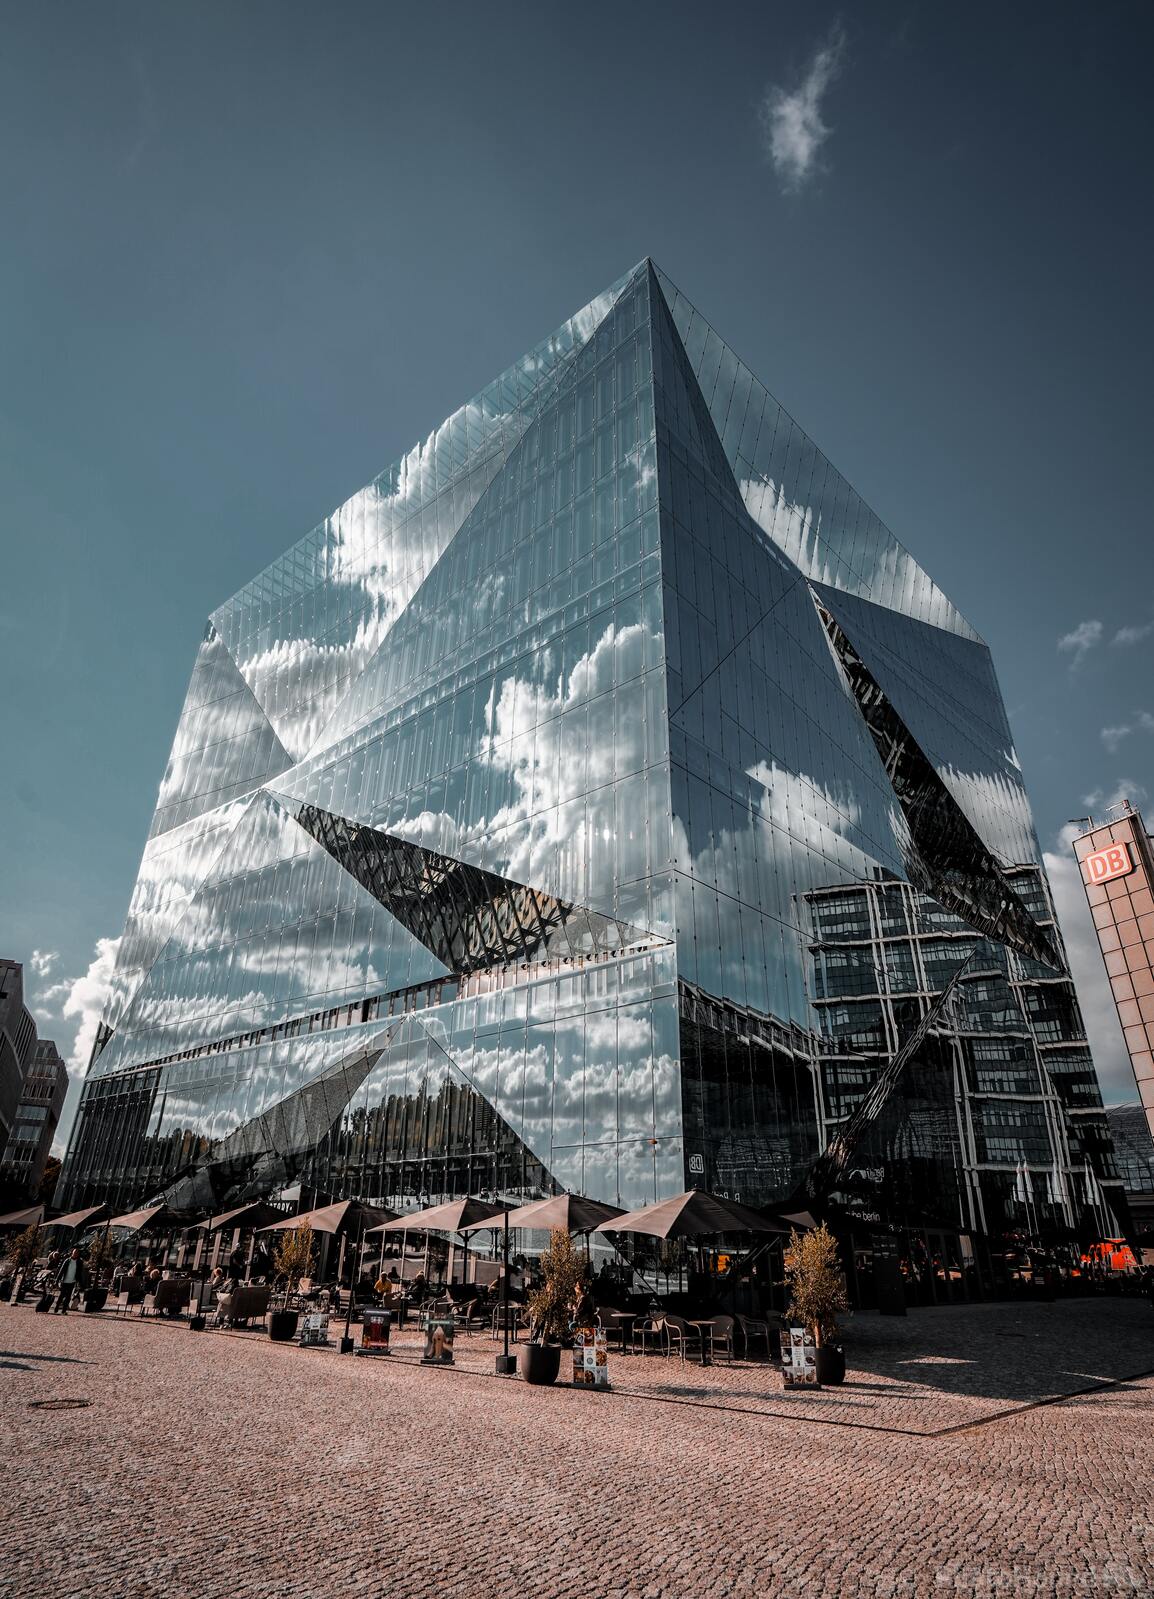 Image of Cube Berlin by Team PhotoHound